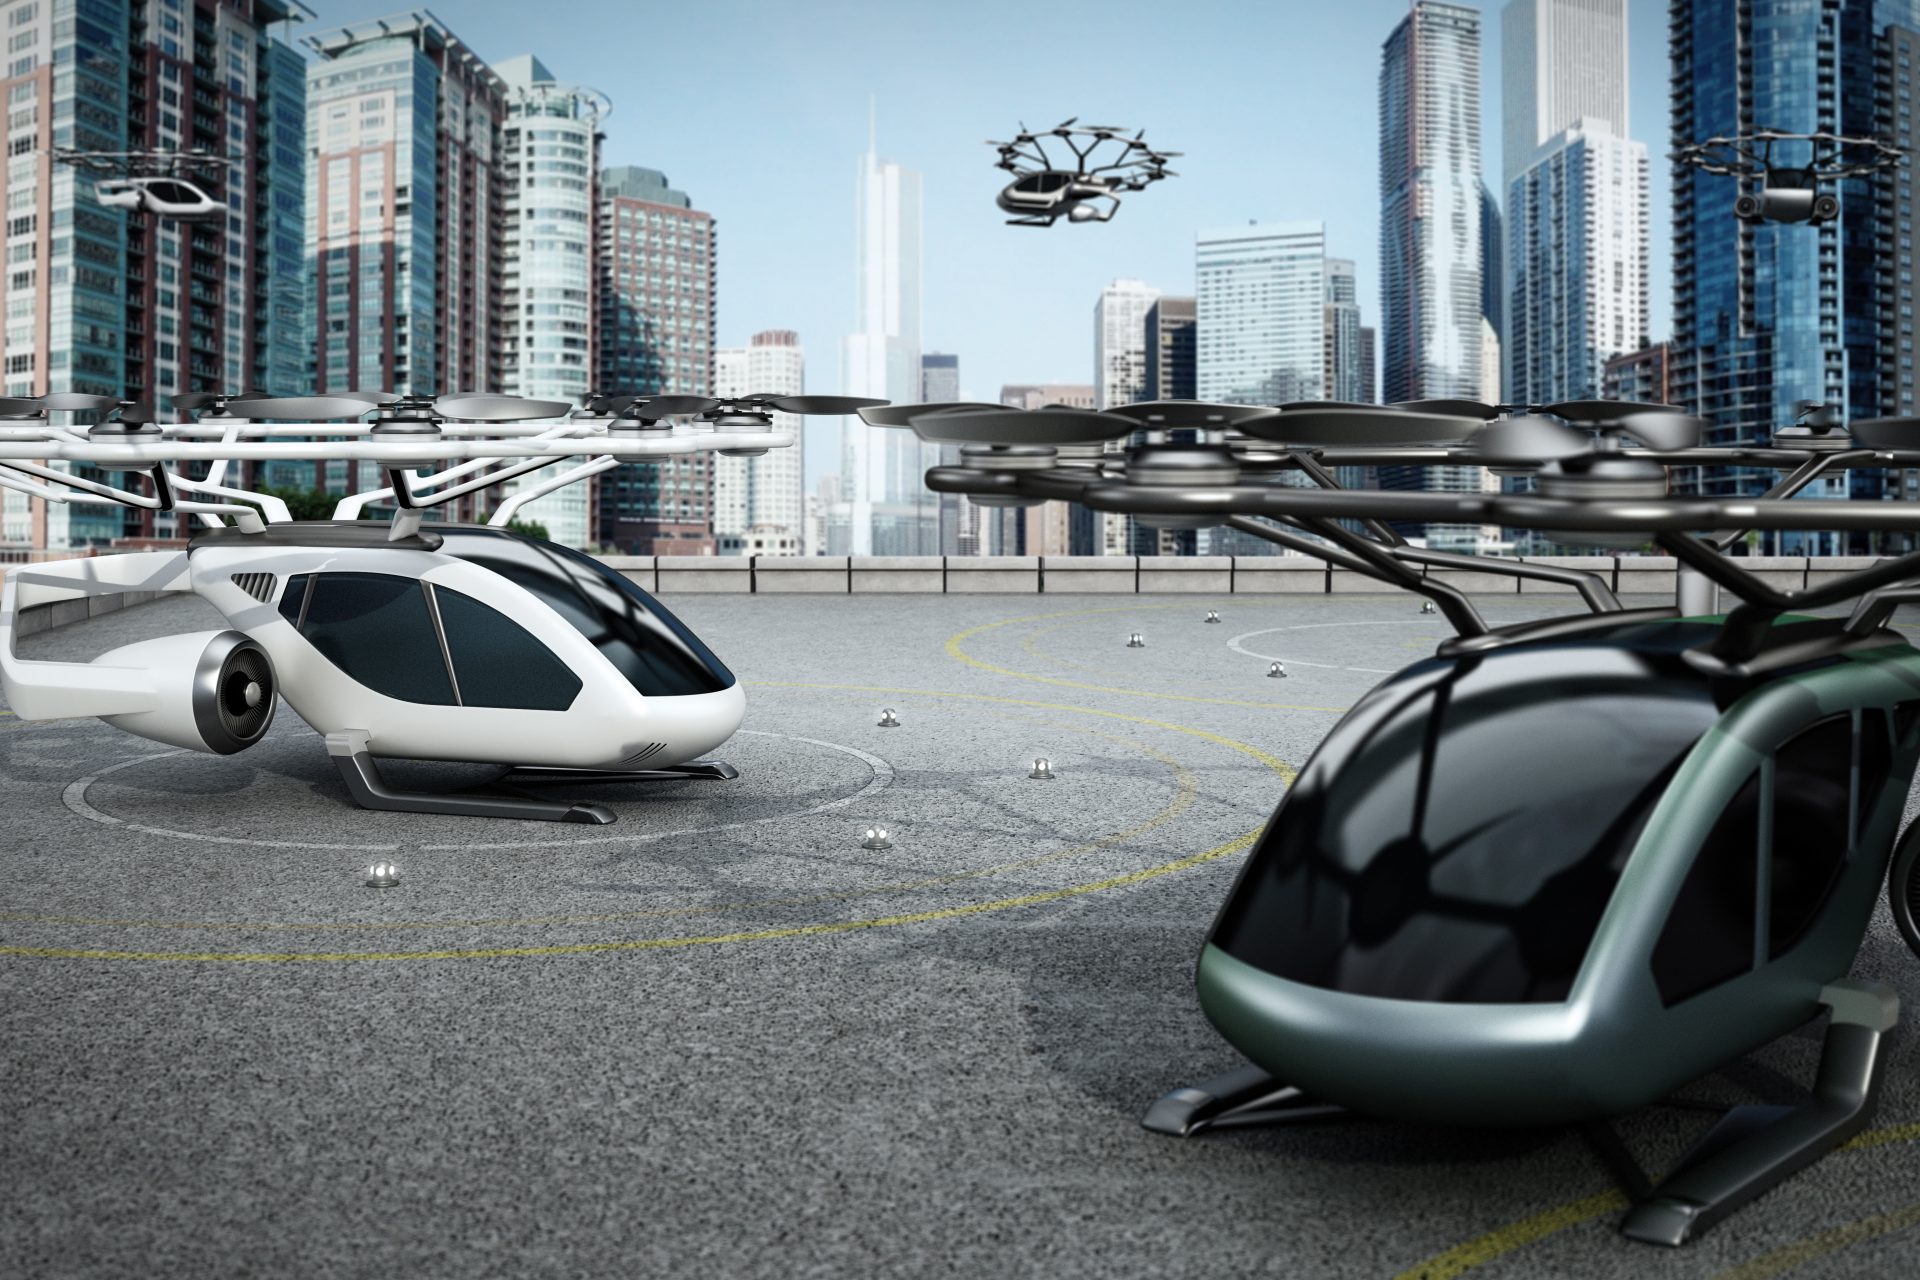 Flying taxis: coming to a city near you in 2025?